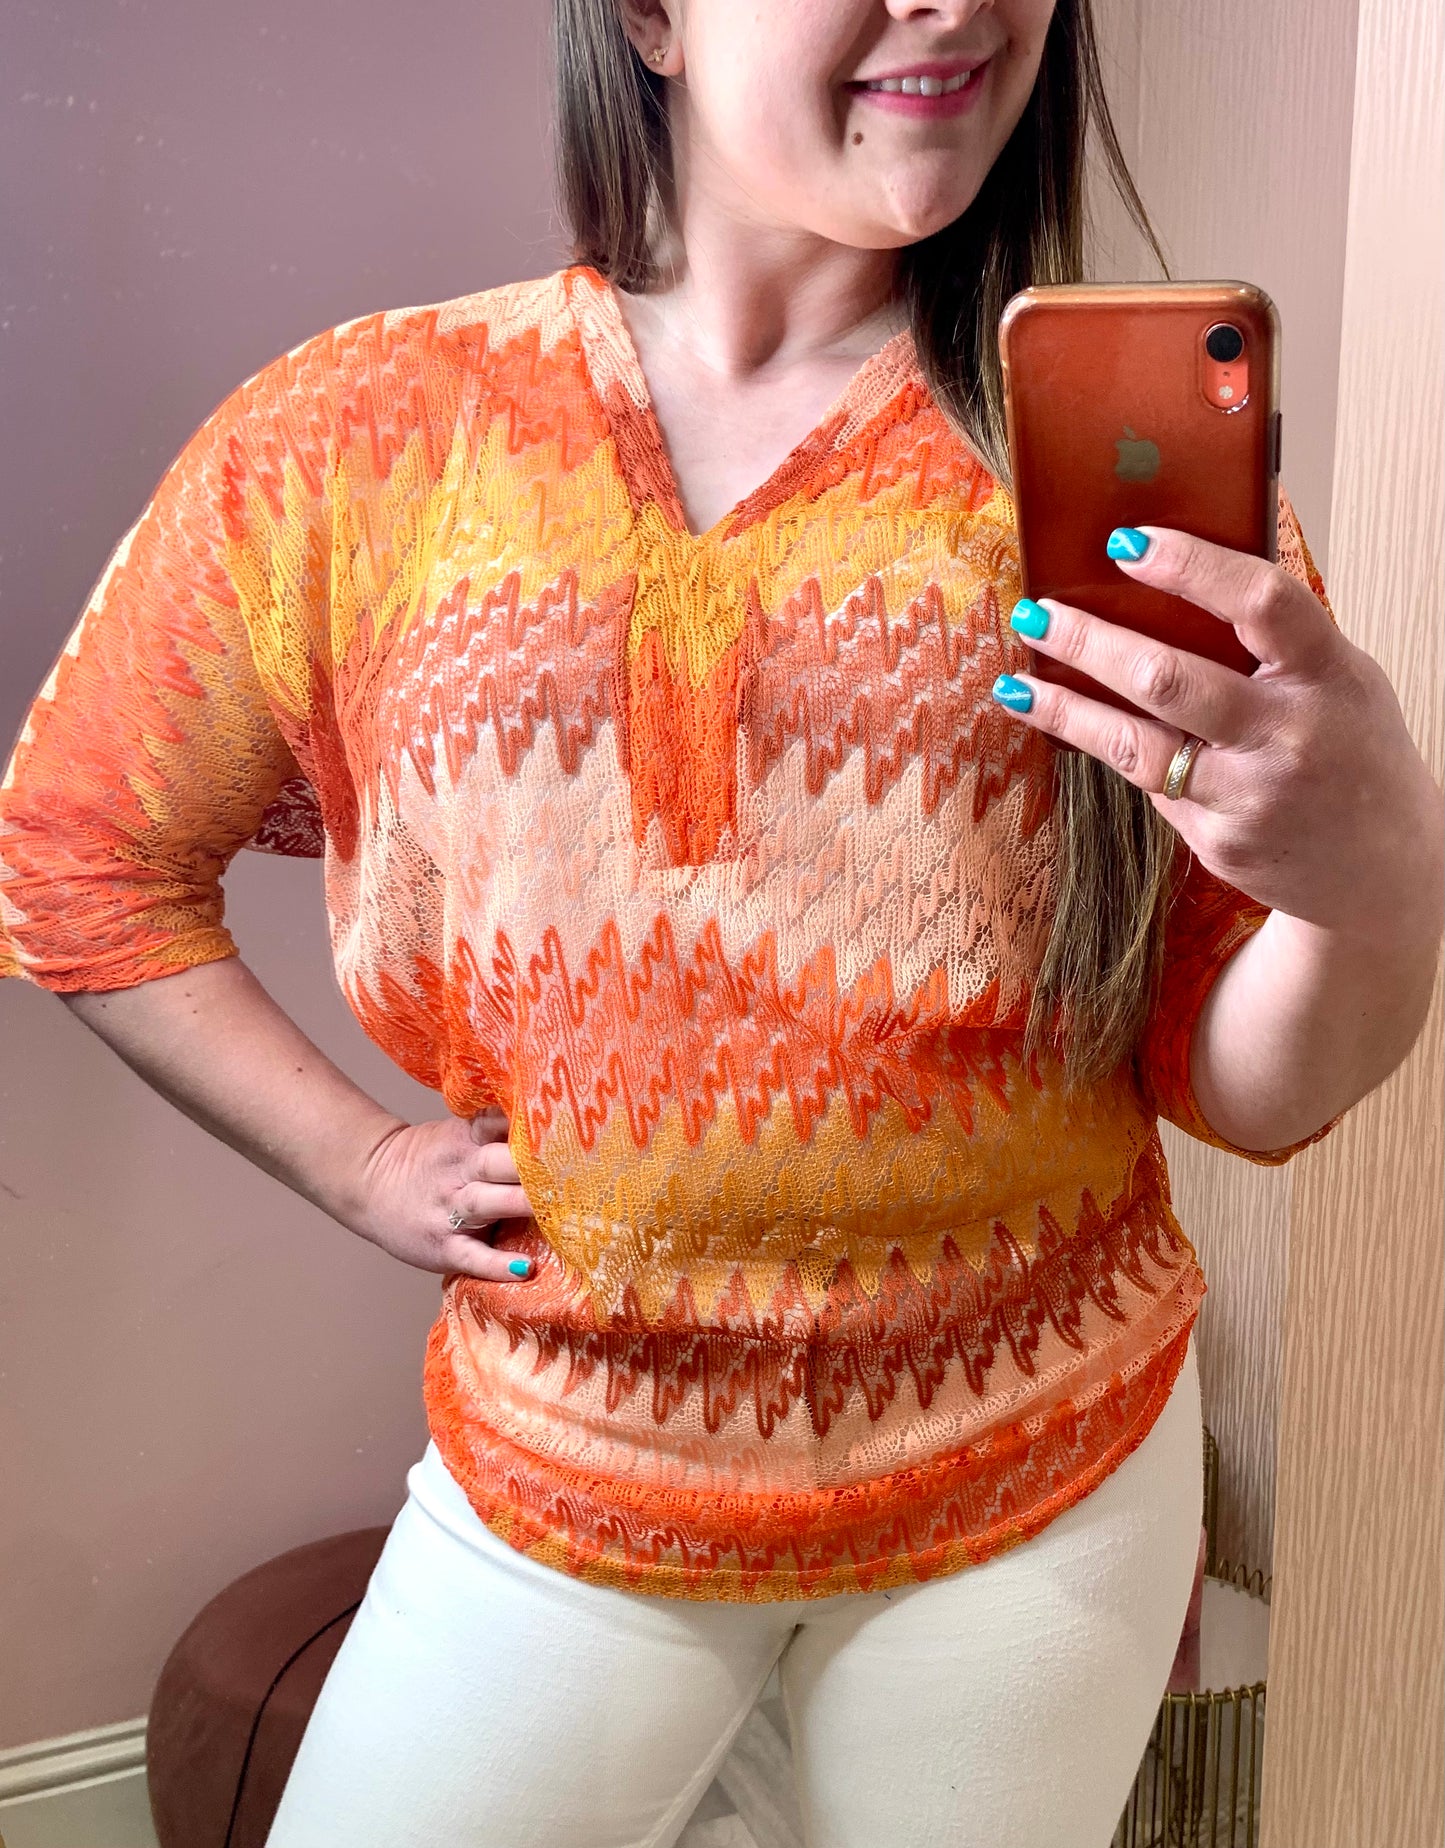 Close up of a young bruntette female stood in front of a pink wall and taking a photo of herself on her phone in the mirror.  She is wearing white skinny trousers and a crochet knit v-neck top.  It has three quarter length sleeves and is a zig zag knit with differing shades of orange.  Her free hand is on her hip.